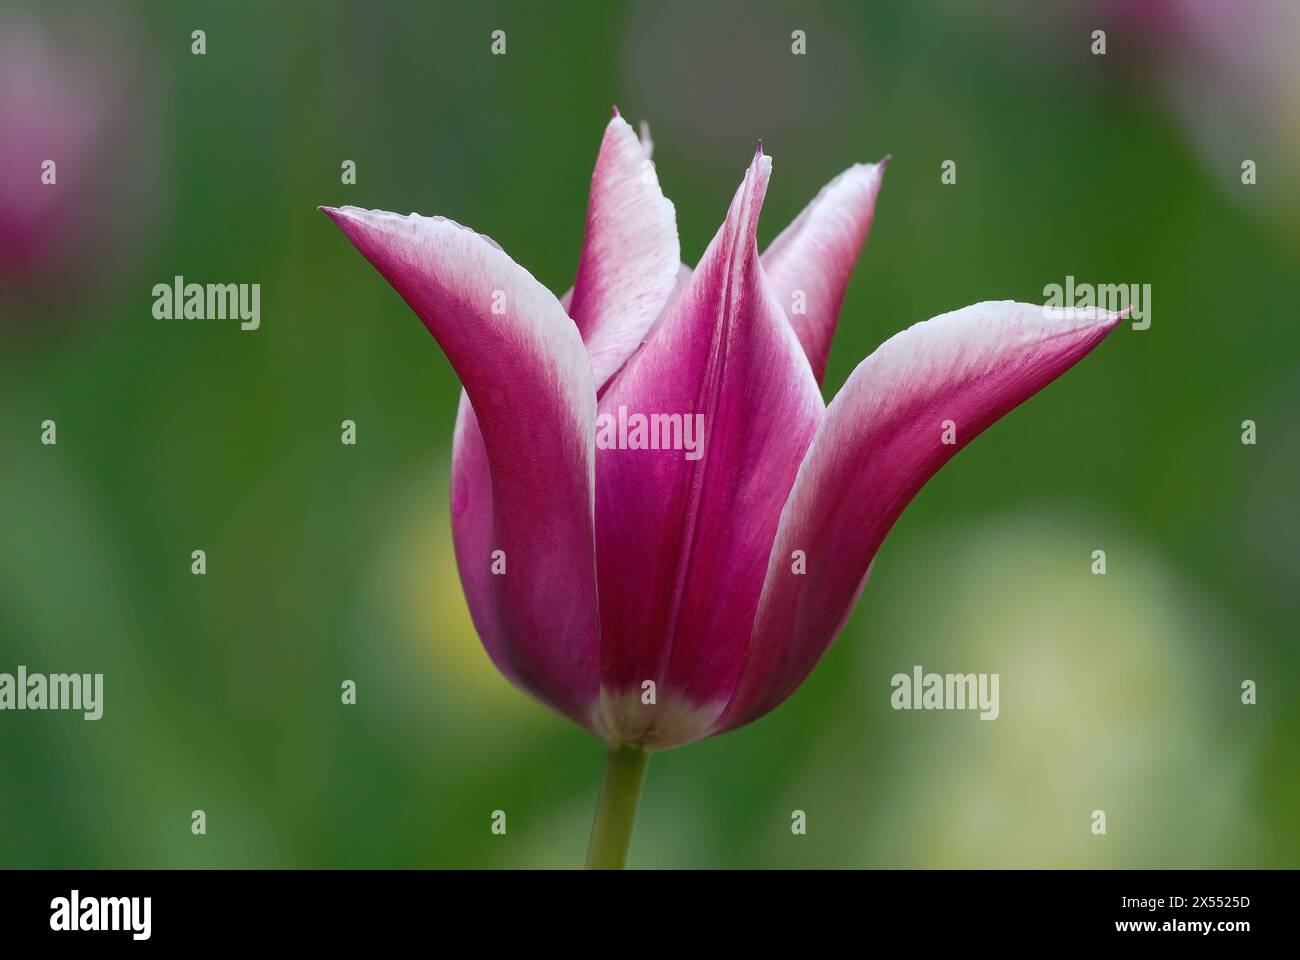 Tulip flower, Tulipa fosteriana, Claudia Lily flowering full bloom,close up. Blurred natural green background, isolated. Dubnica nad Vahom, Slovakia Stock Photo